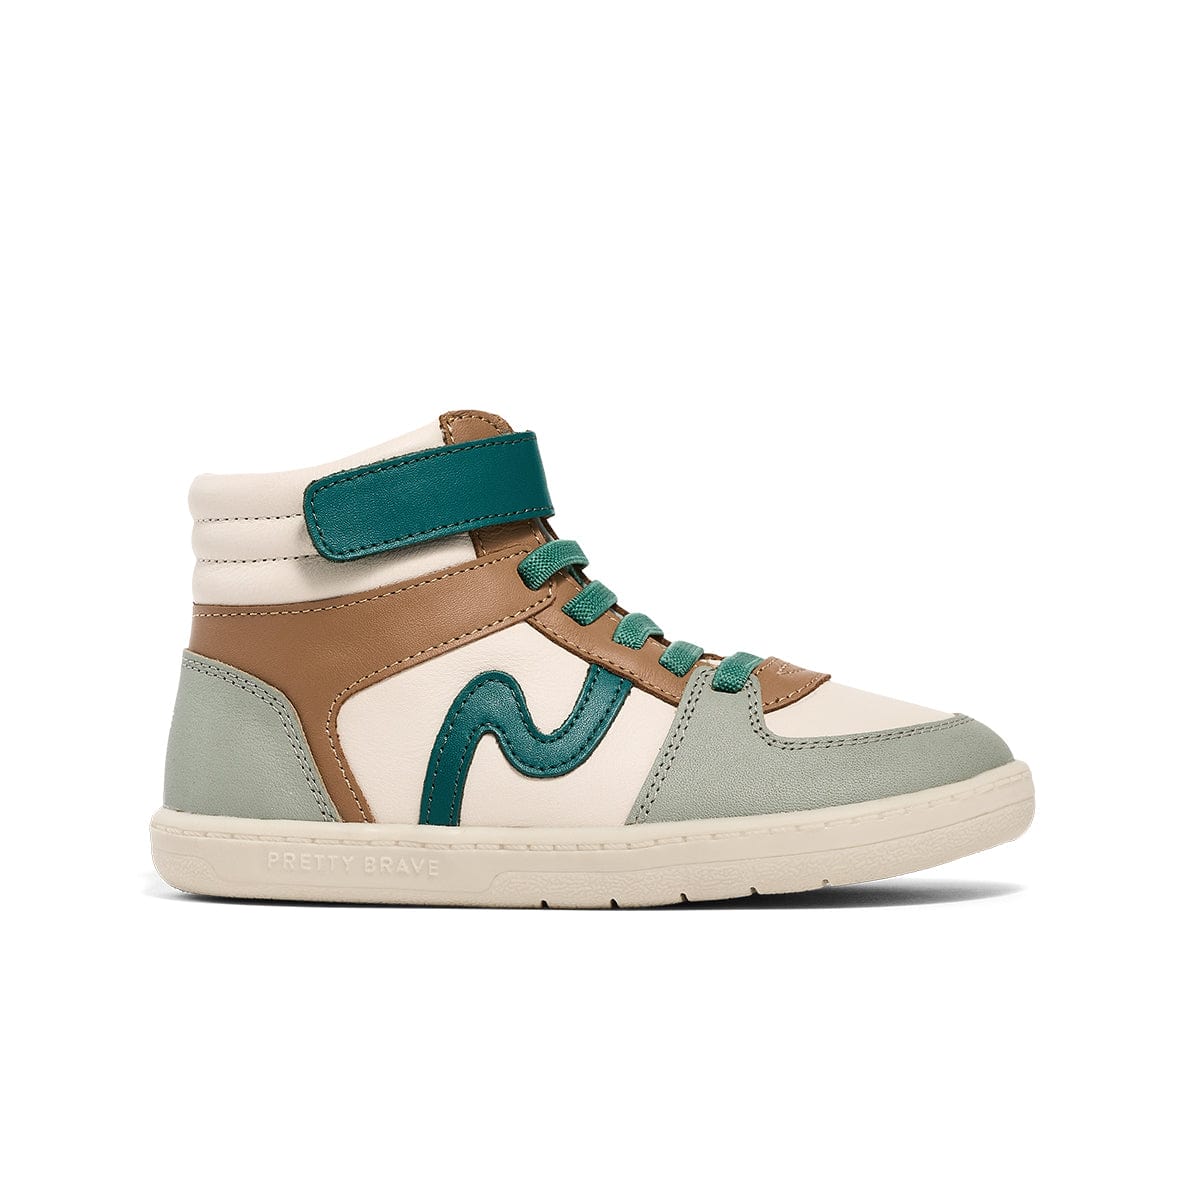 Pretty Brave Unisex Shoes Hi-Top in Forest